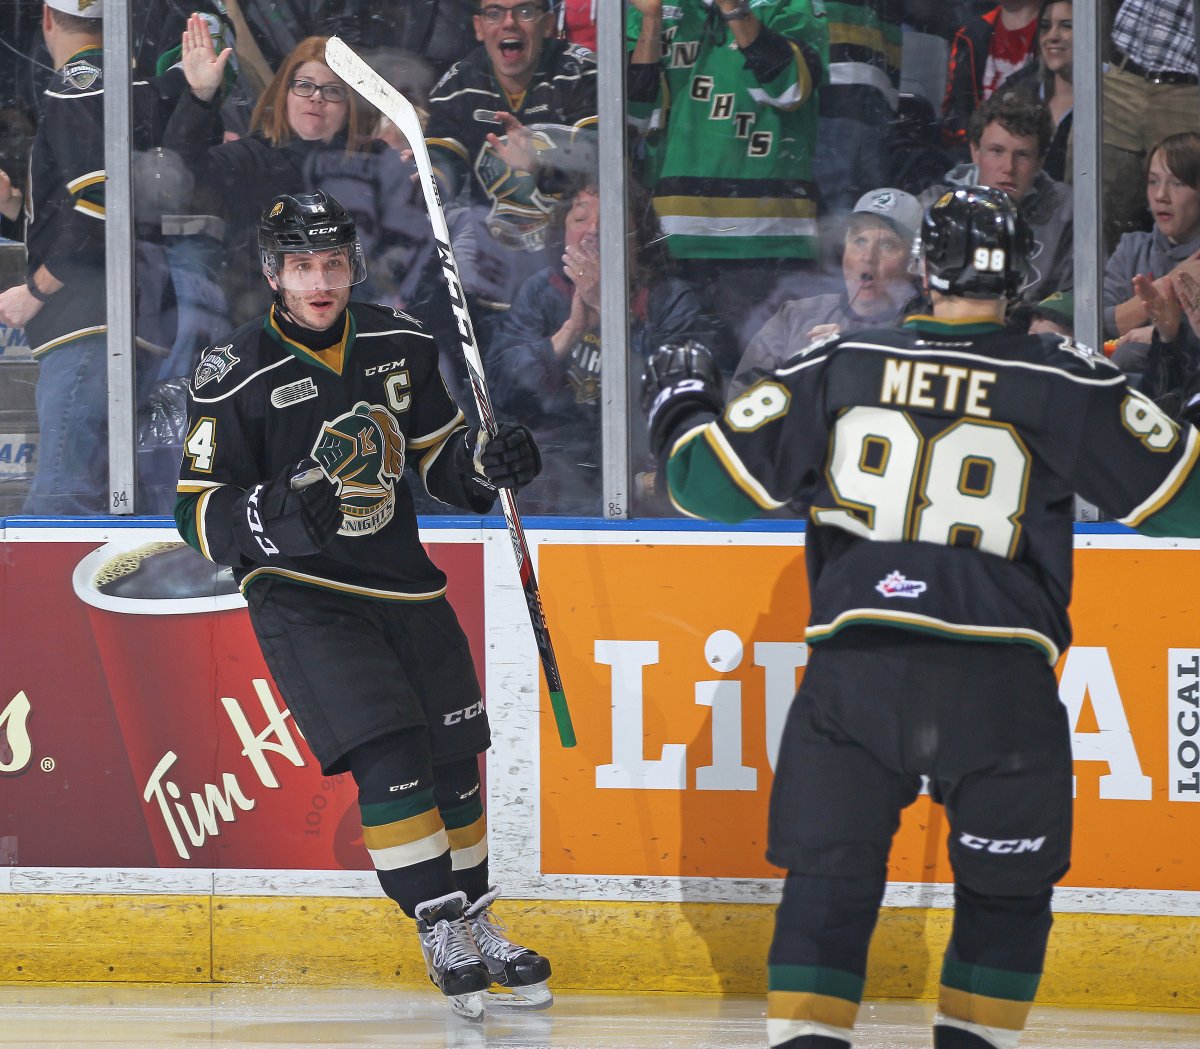 JJ Piccinich of the London Knights celebrates a goal at Budweiser Gardens.